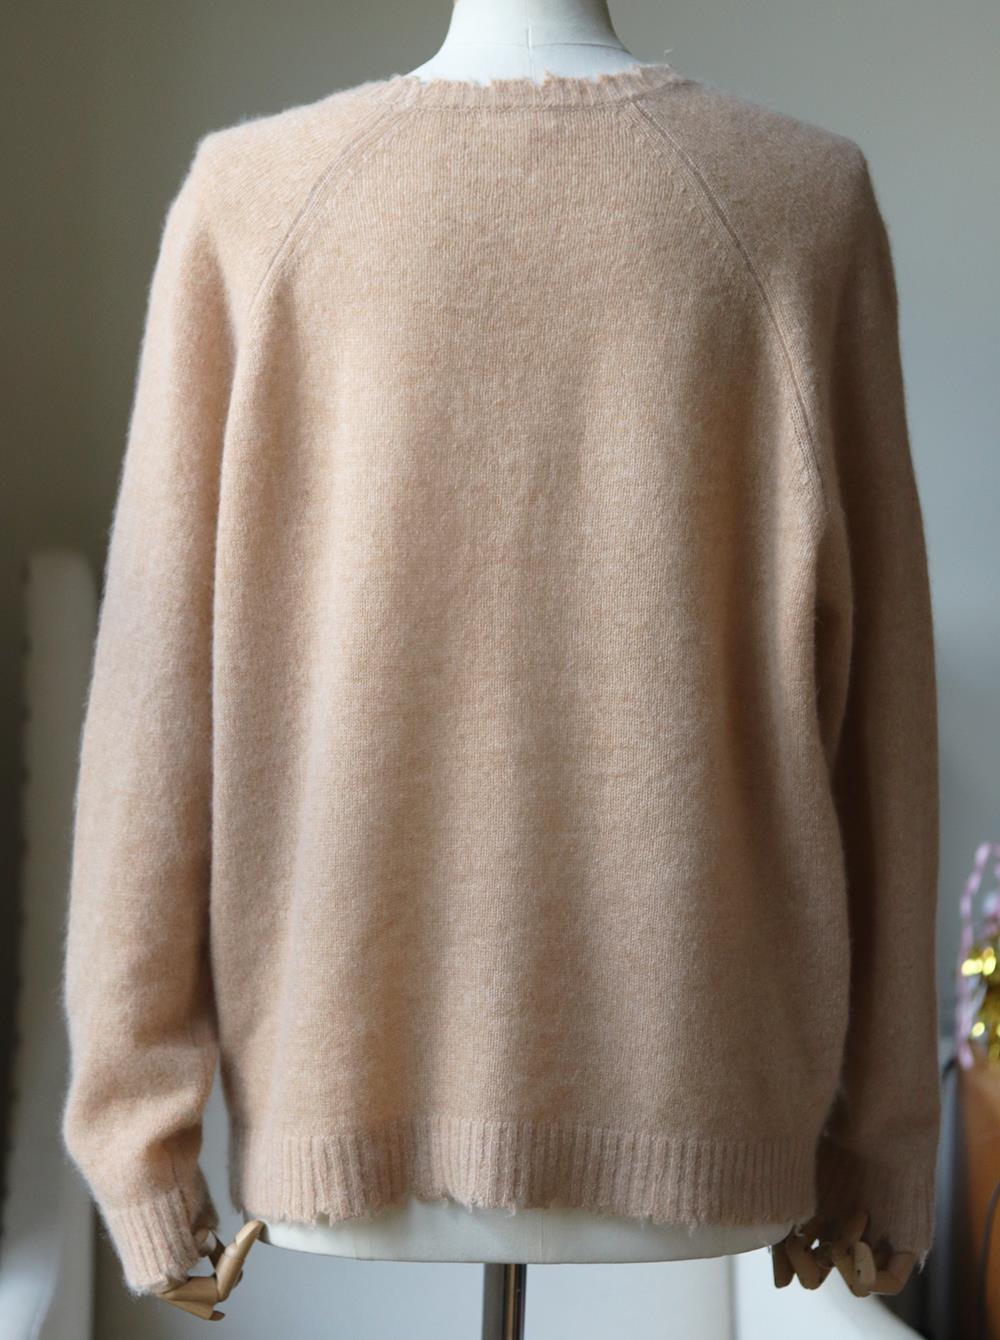 MINNIE ROSE DISTRESSED CASHMERE SWEATER LARGE